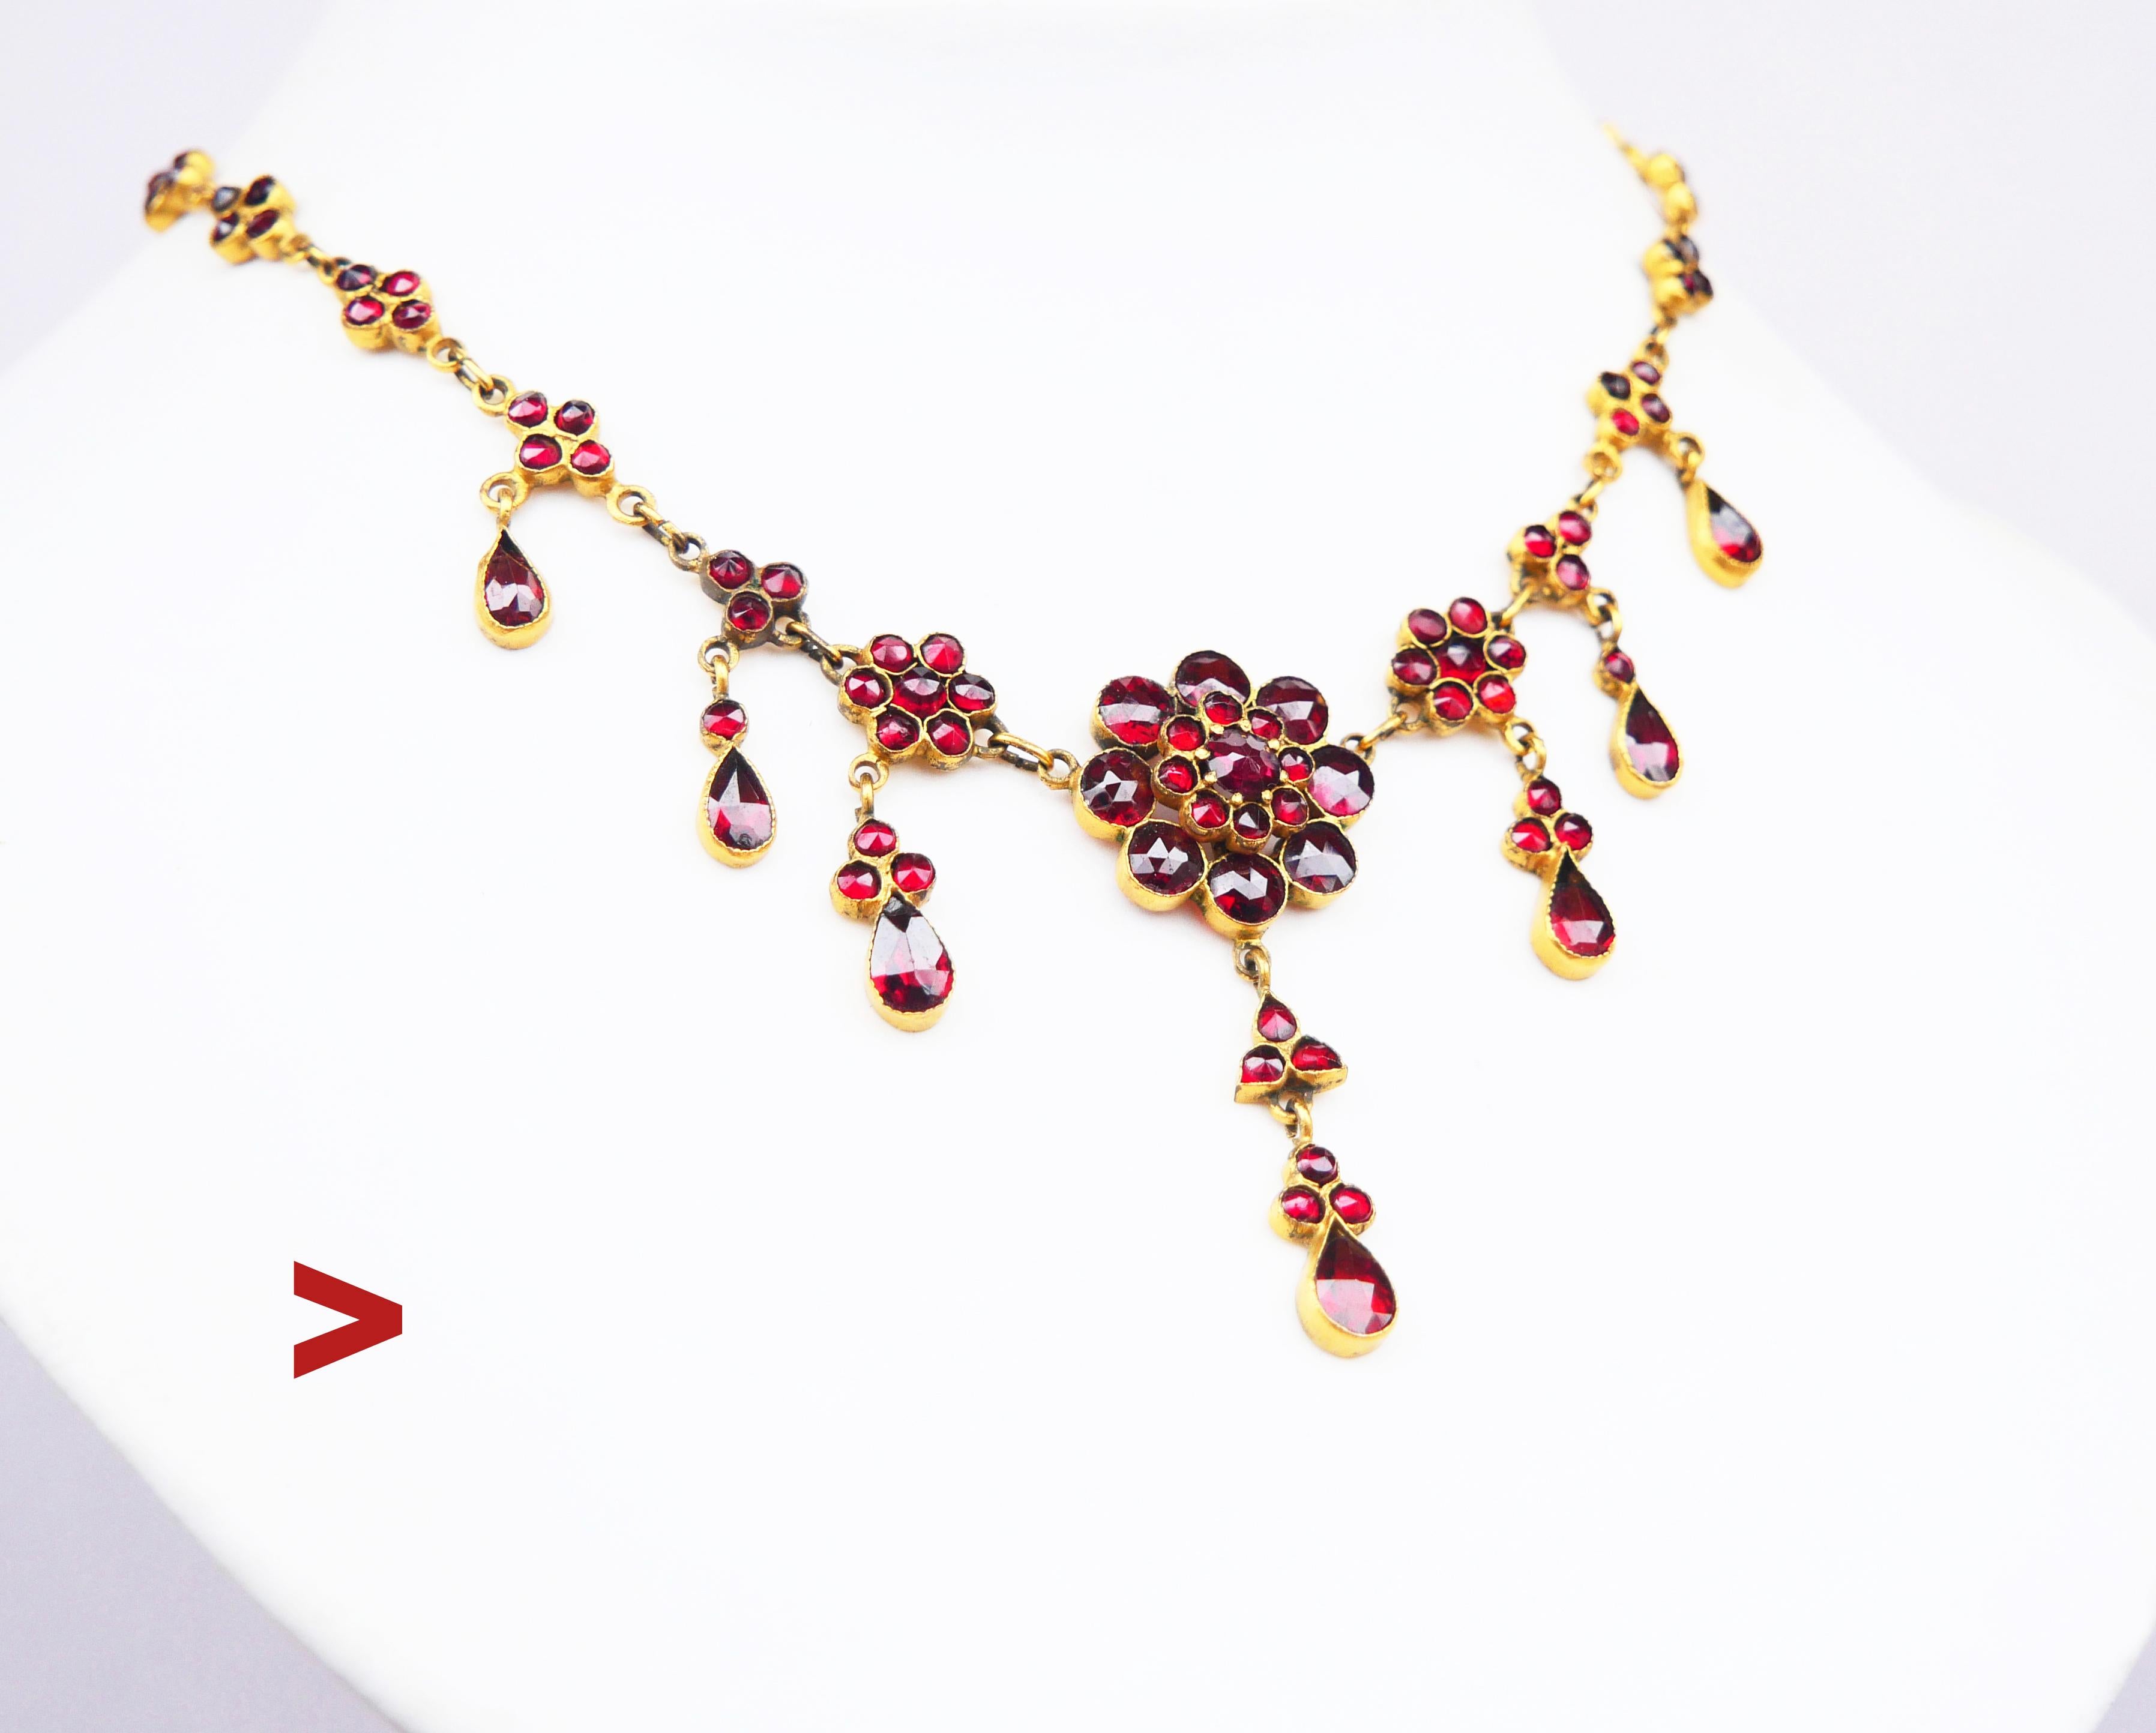 Bohemian ca. 1900 s-1920's Austrian / Bohemian Garnet Necklace. No hallmarks.

All metal parts made of gilded Silver. All blood Red Bohemian Garnets are rose cut and bezel set. Central flower and drop shaped dangles have open backs, all other parts